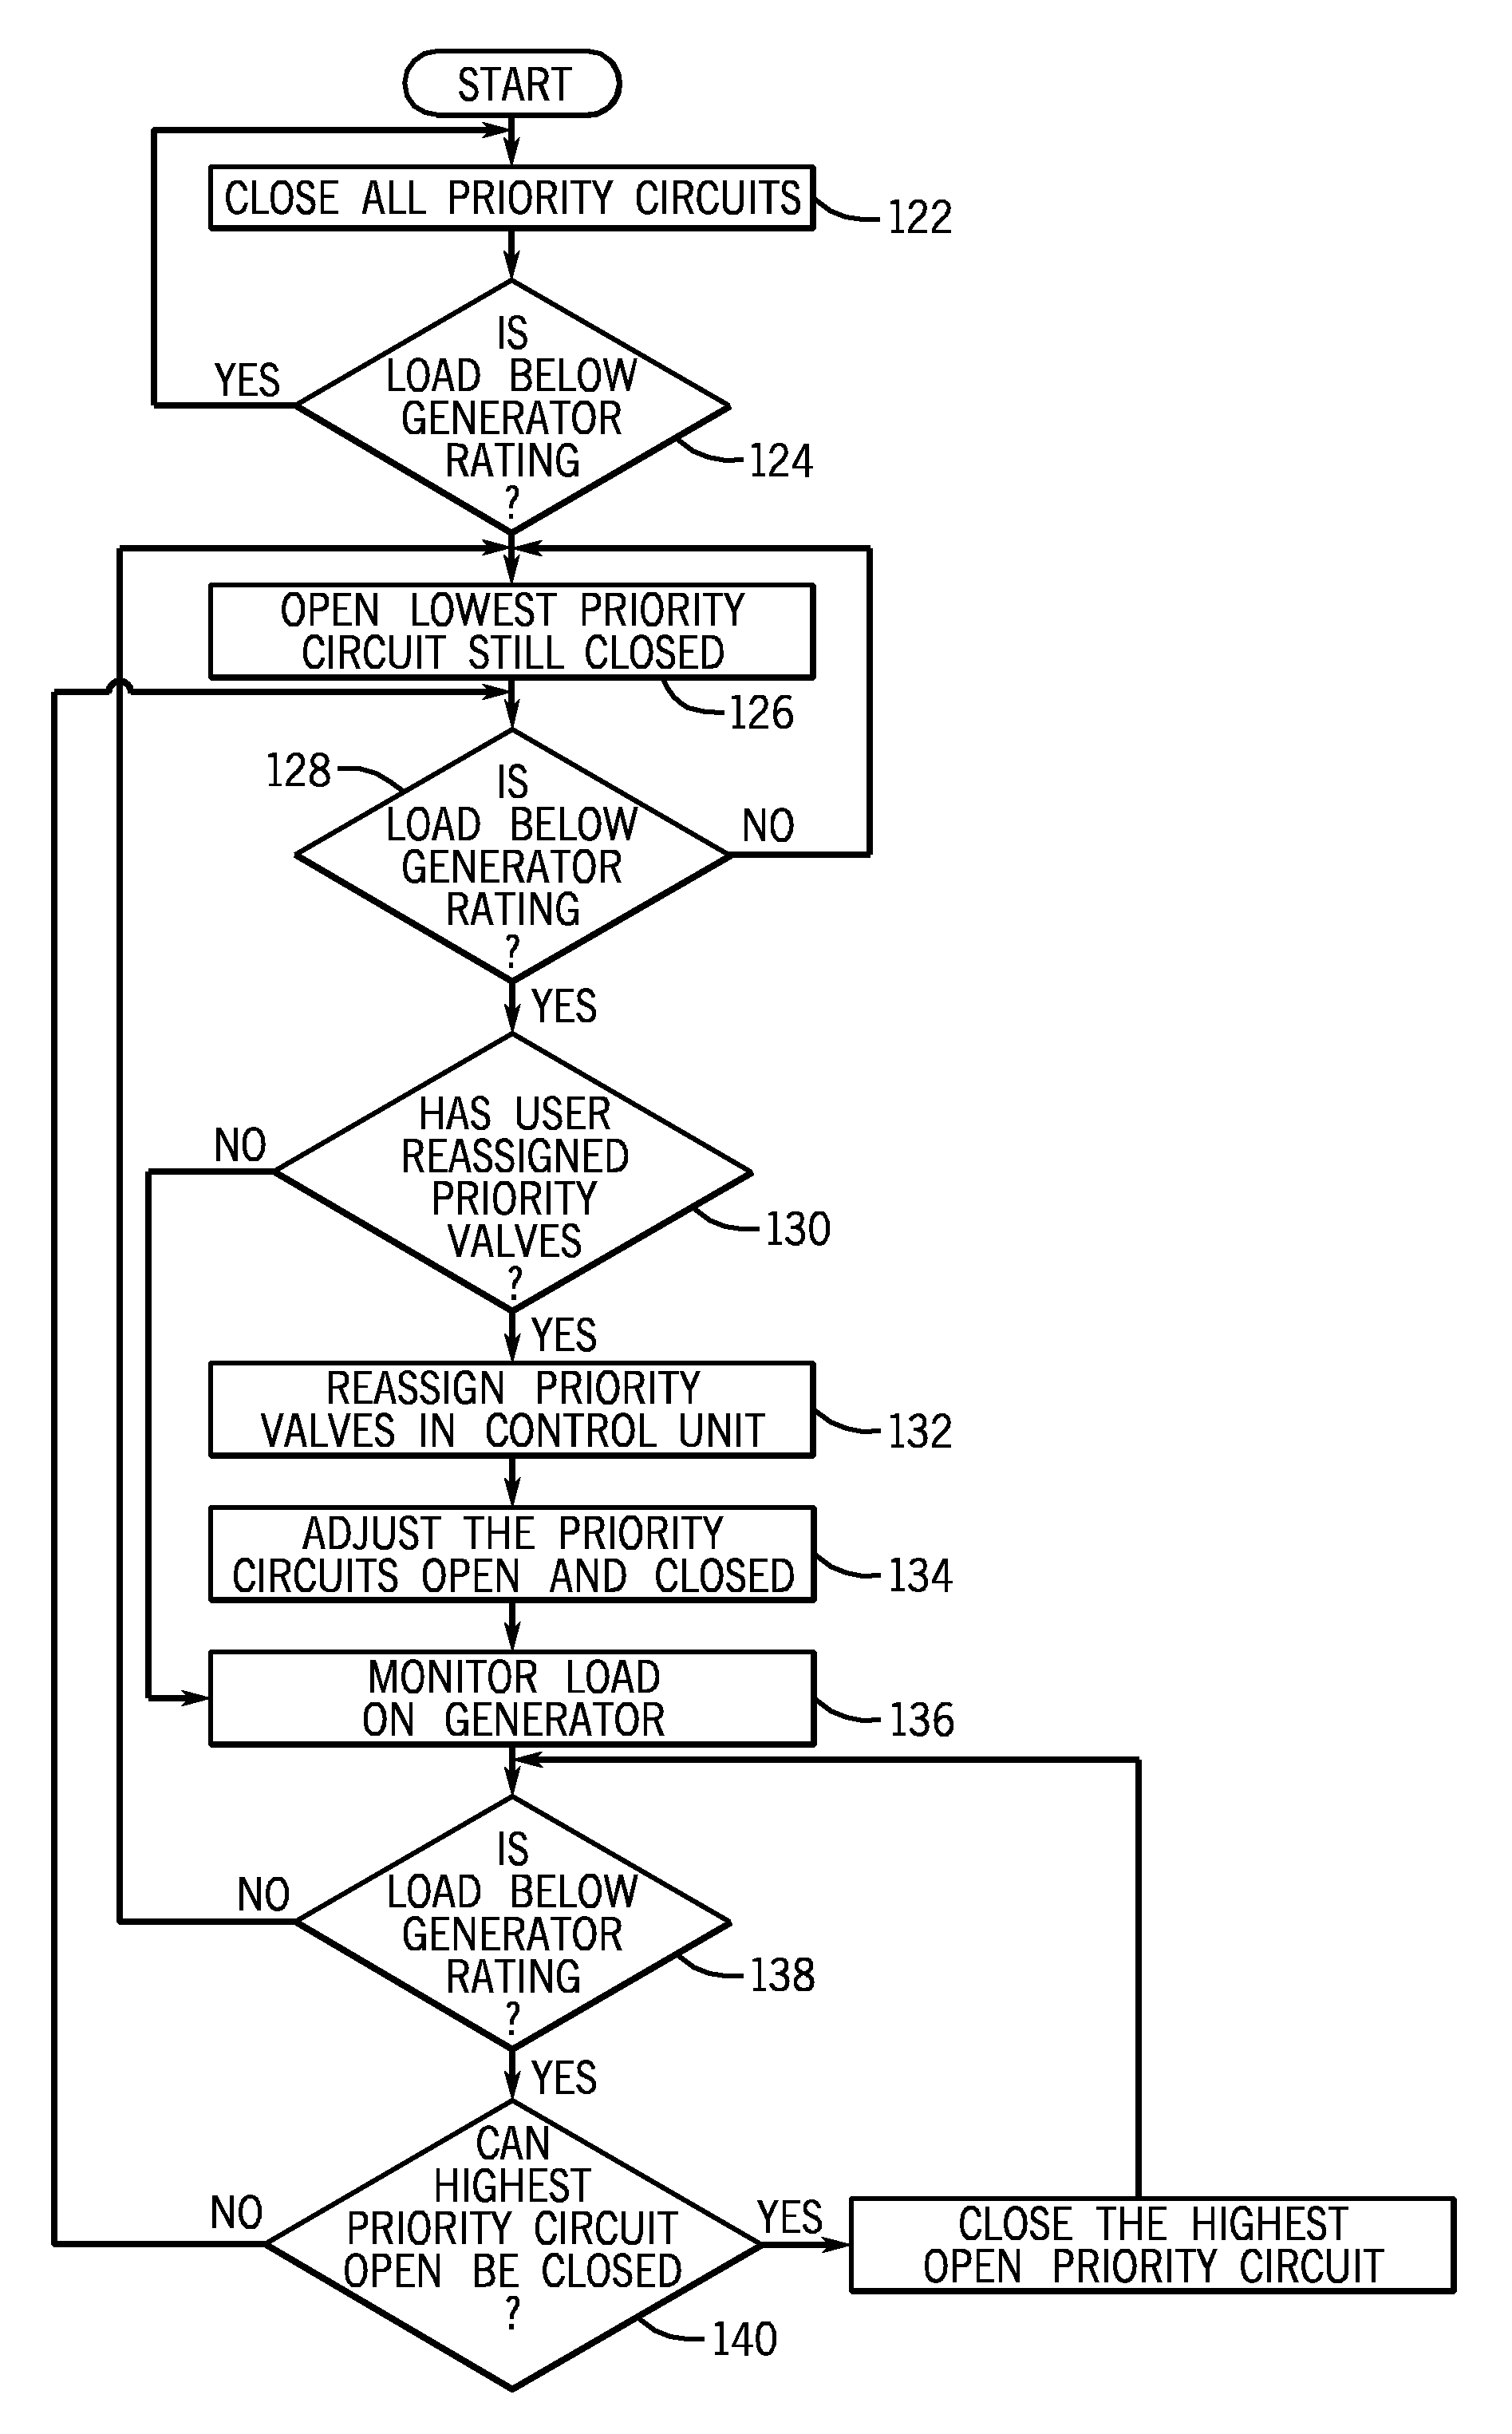 Dynamic load shedding system for a standby generator